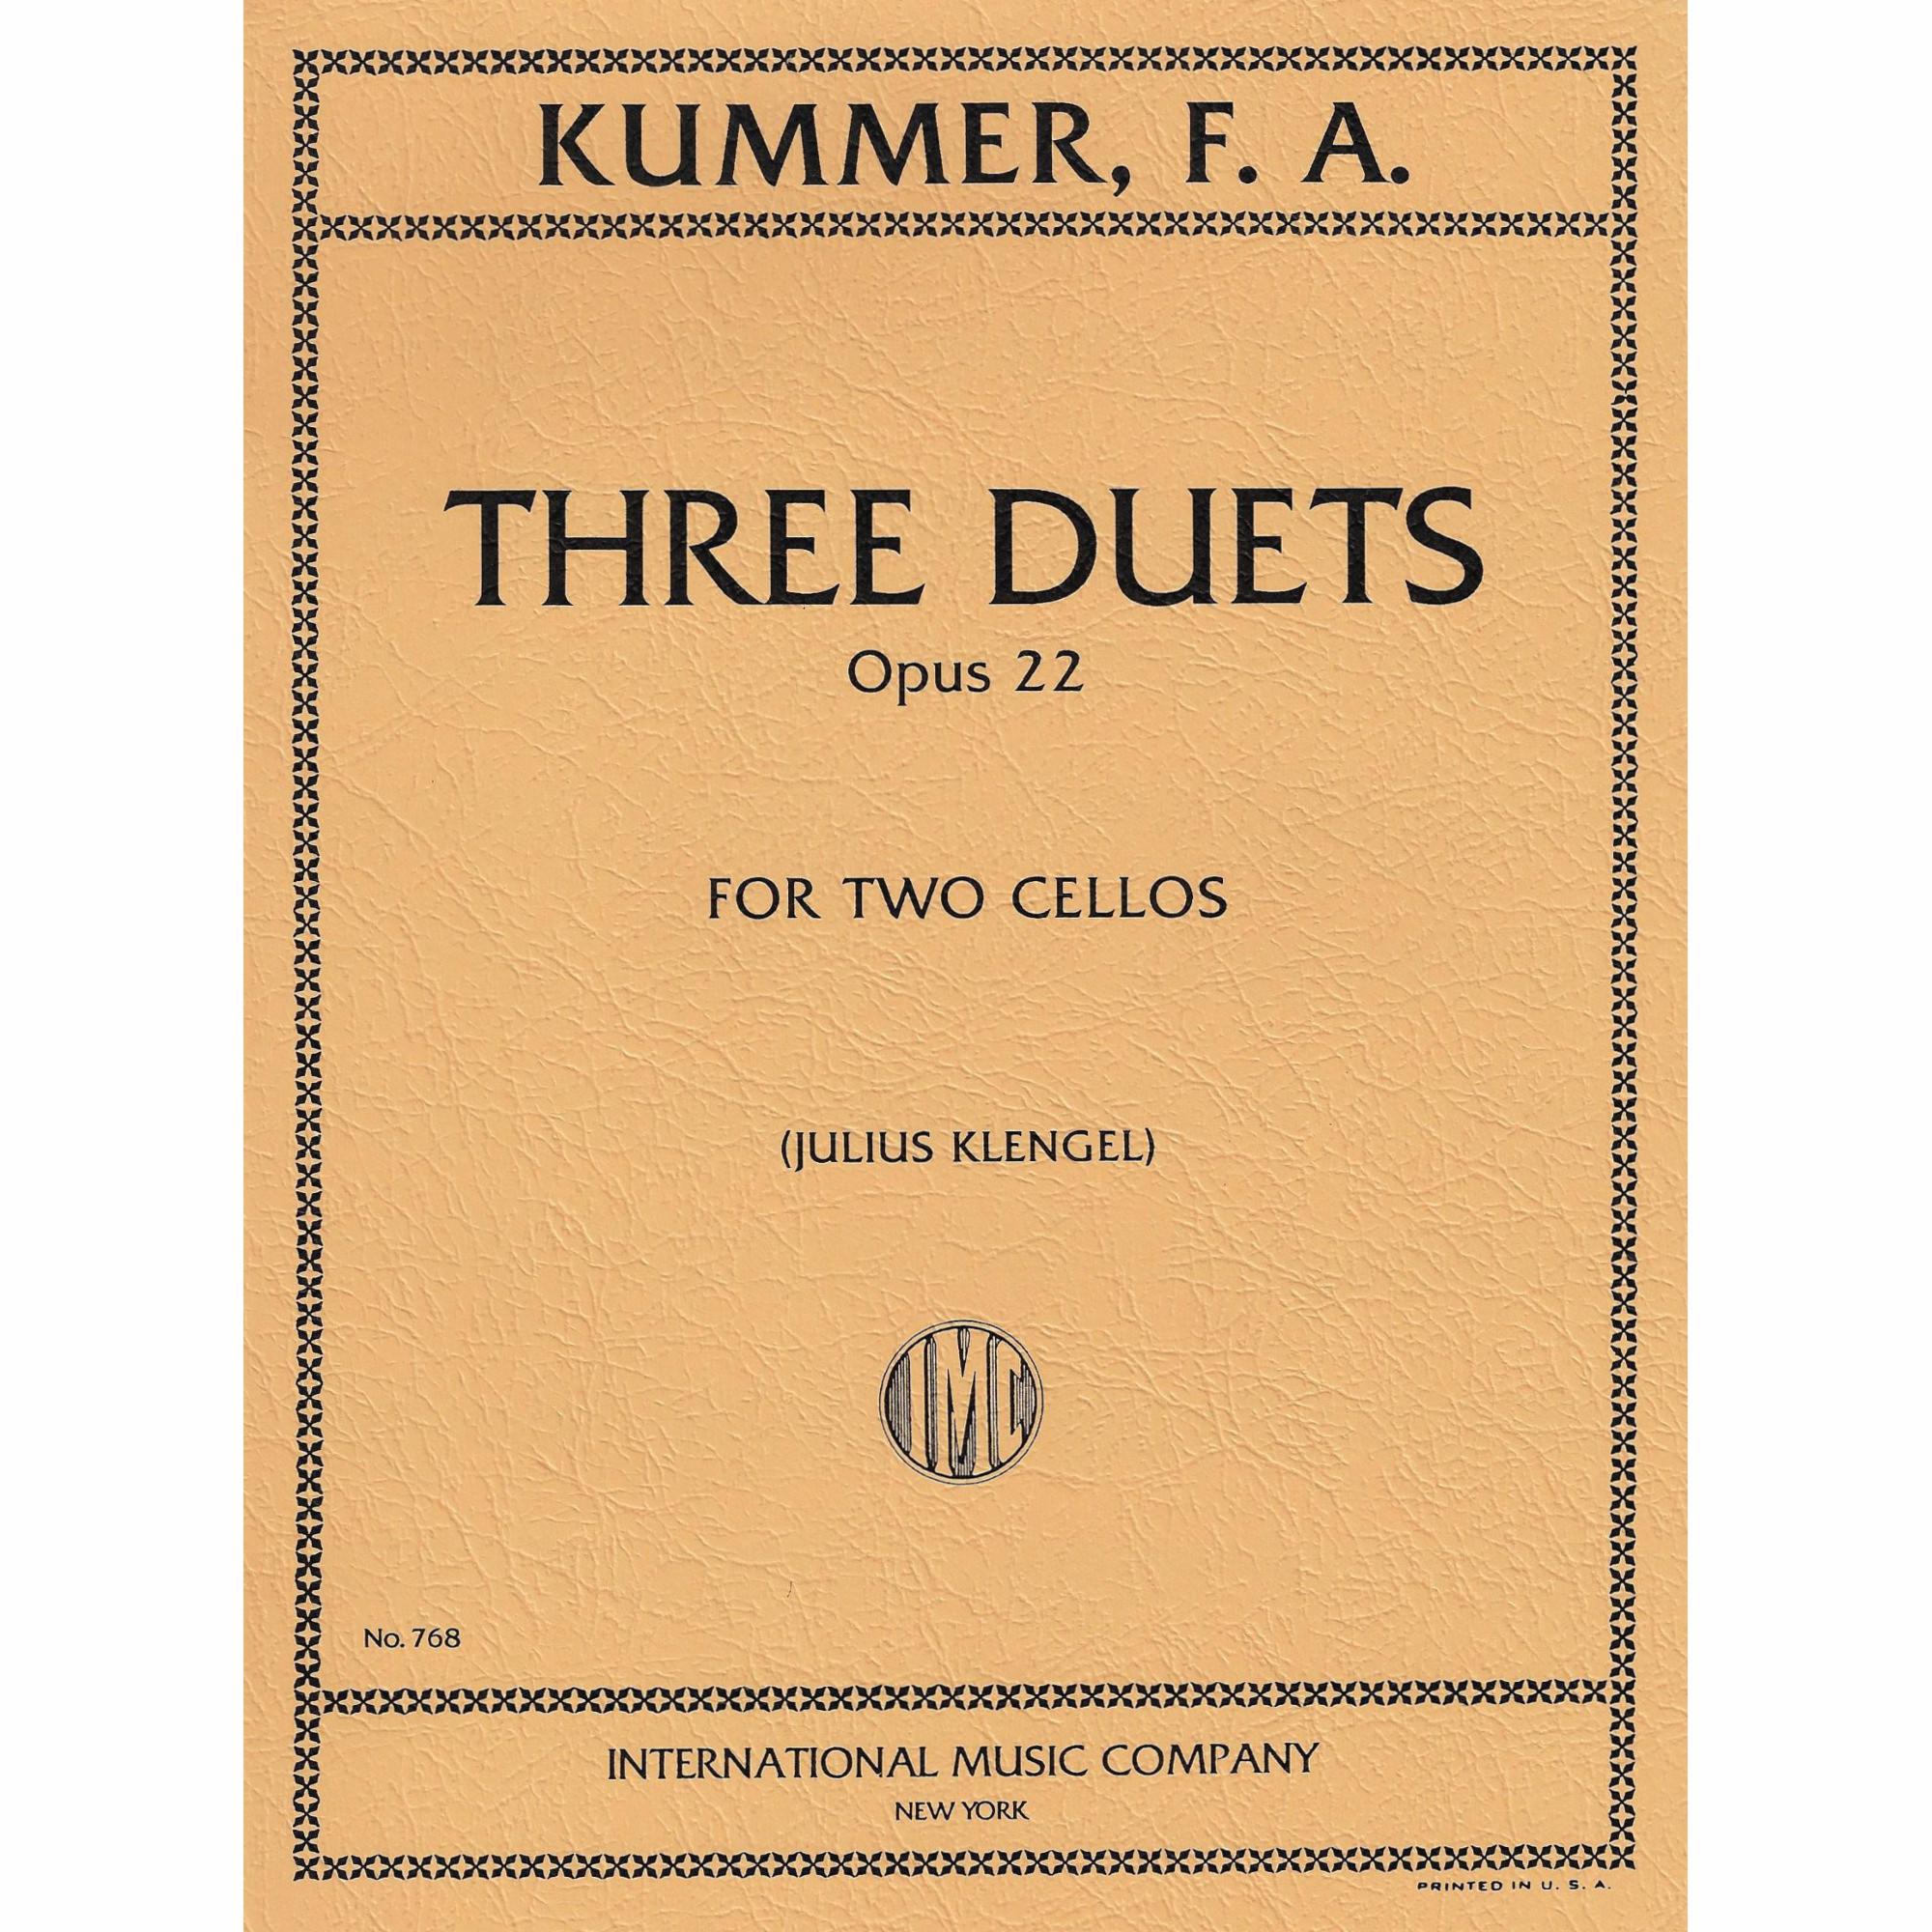 Kummer -- Three Duets, Op. 22 for Two Cellos